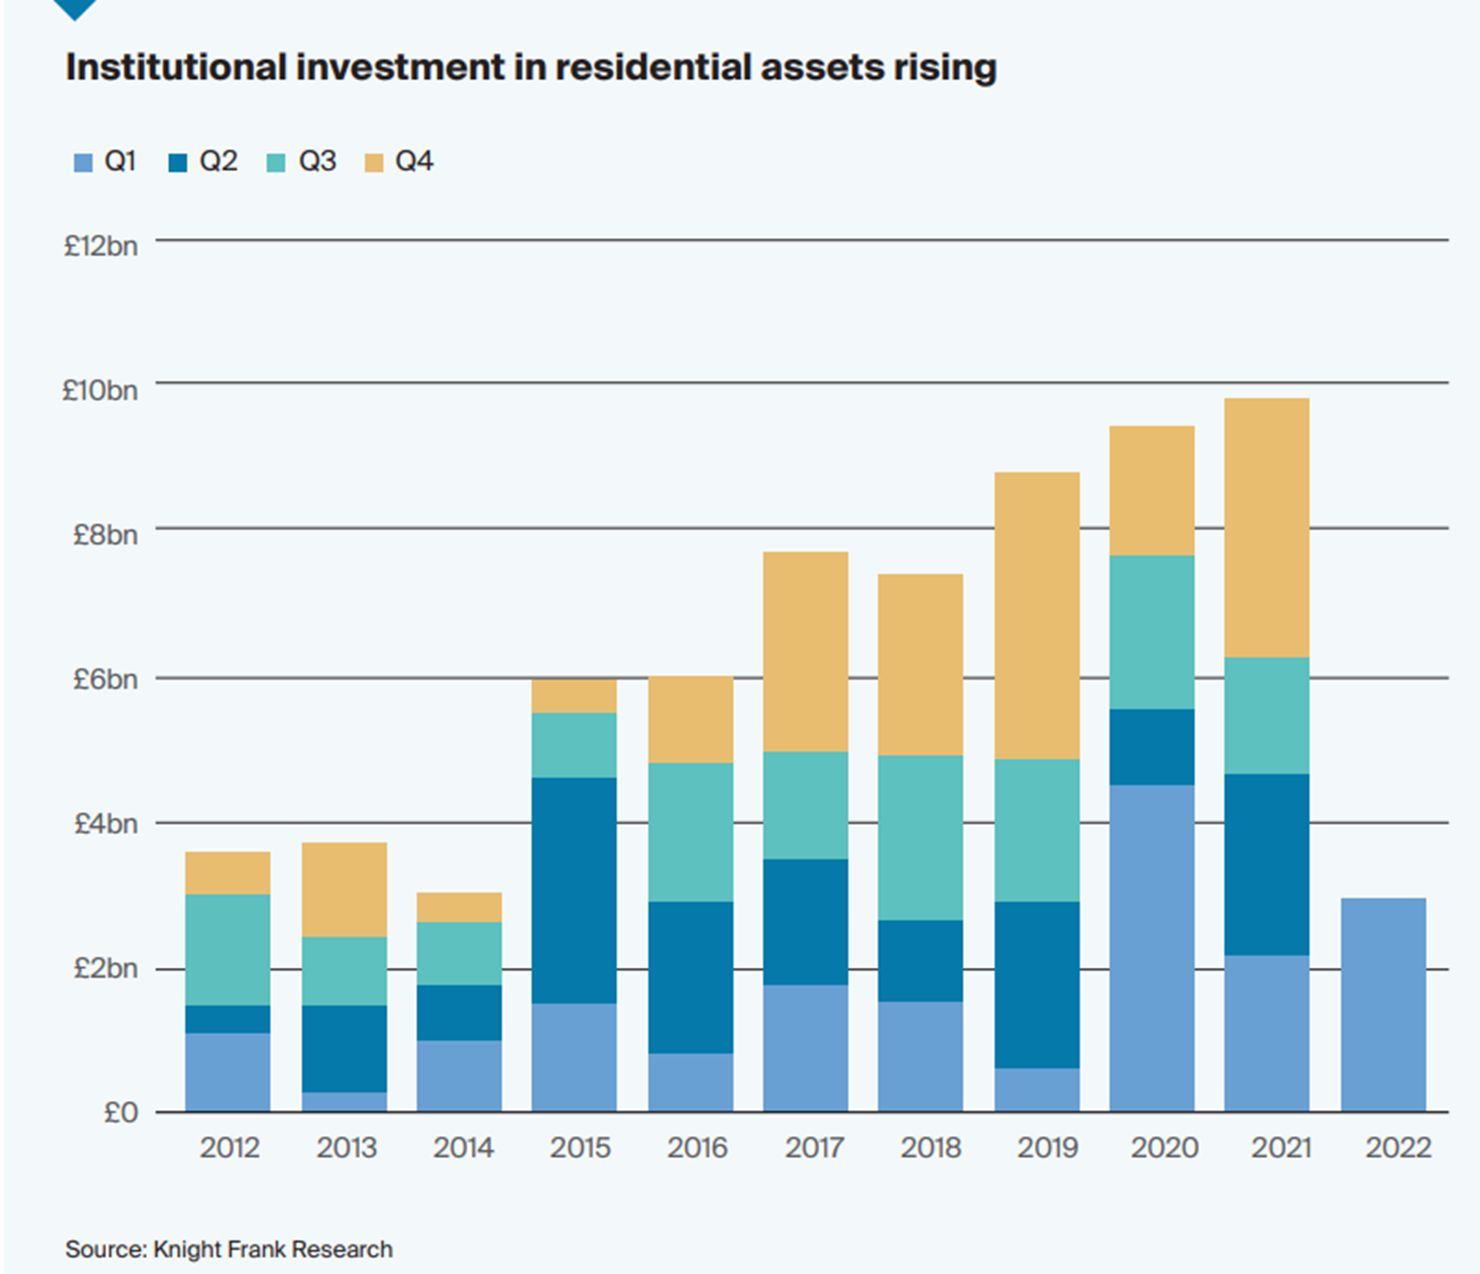 Investment in residential assets in UK is rising